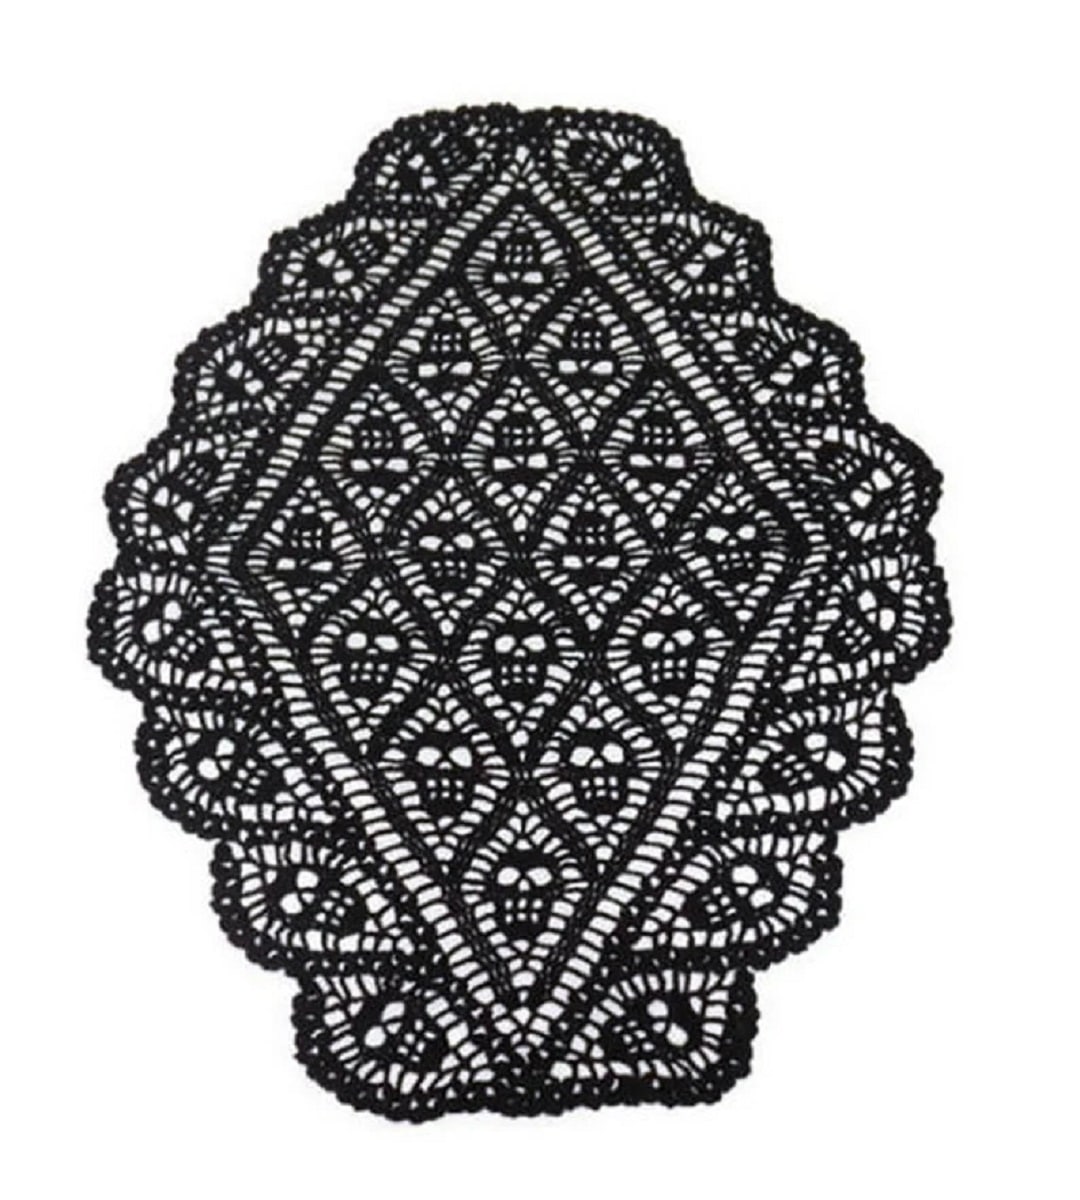 Large black crochet doily with diamond design and skulls stitched into it on a plain white background.